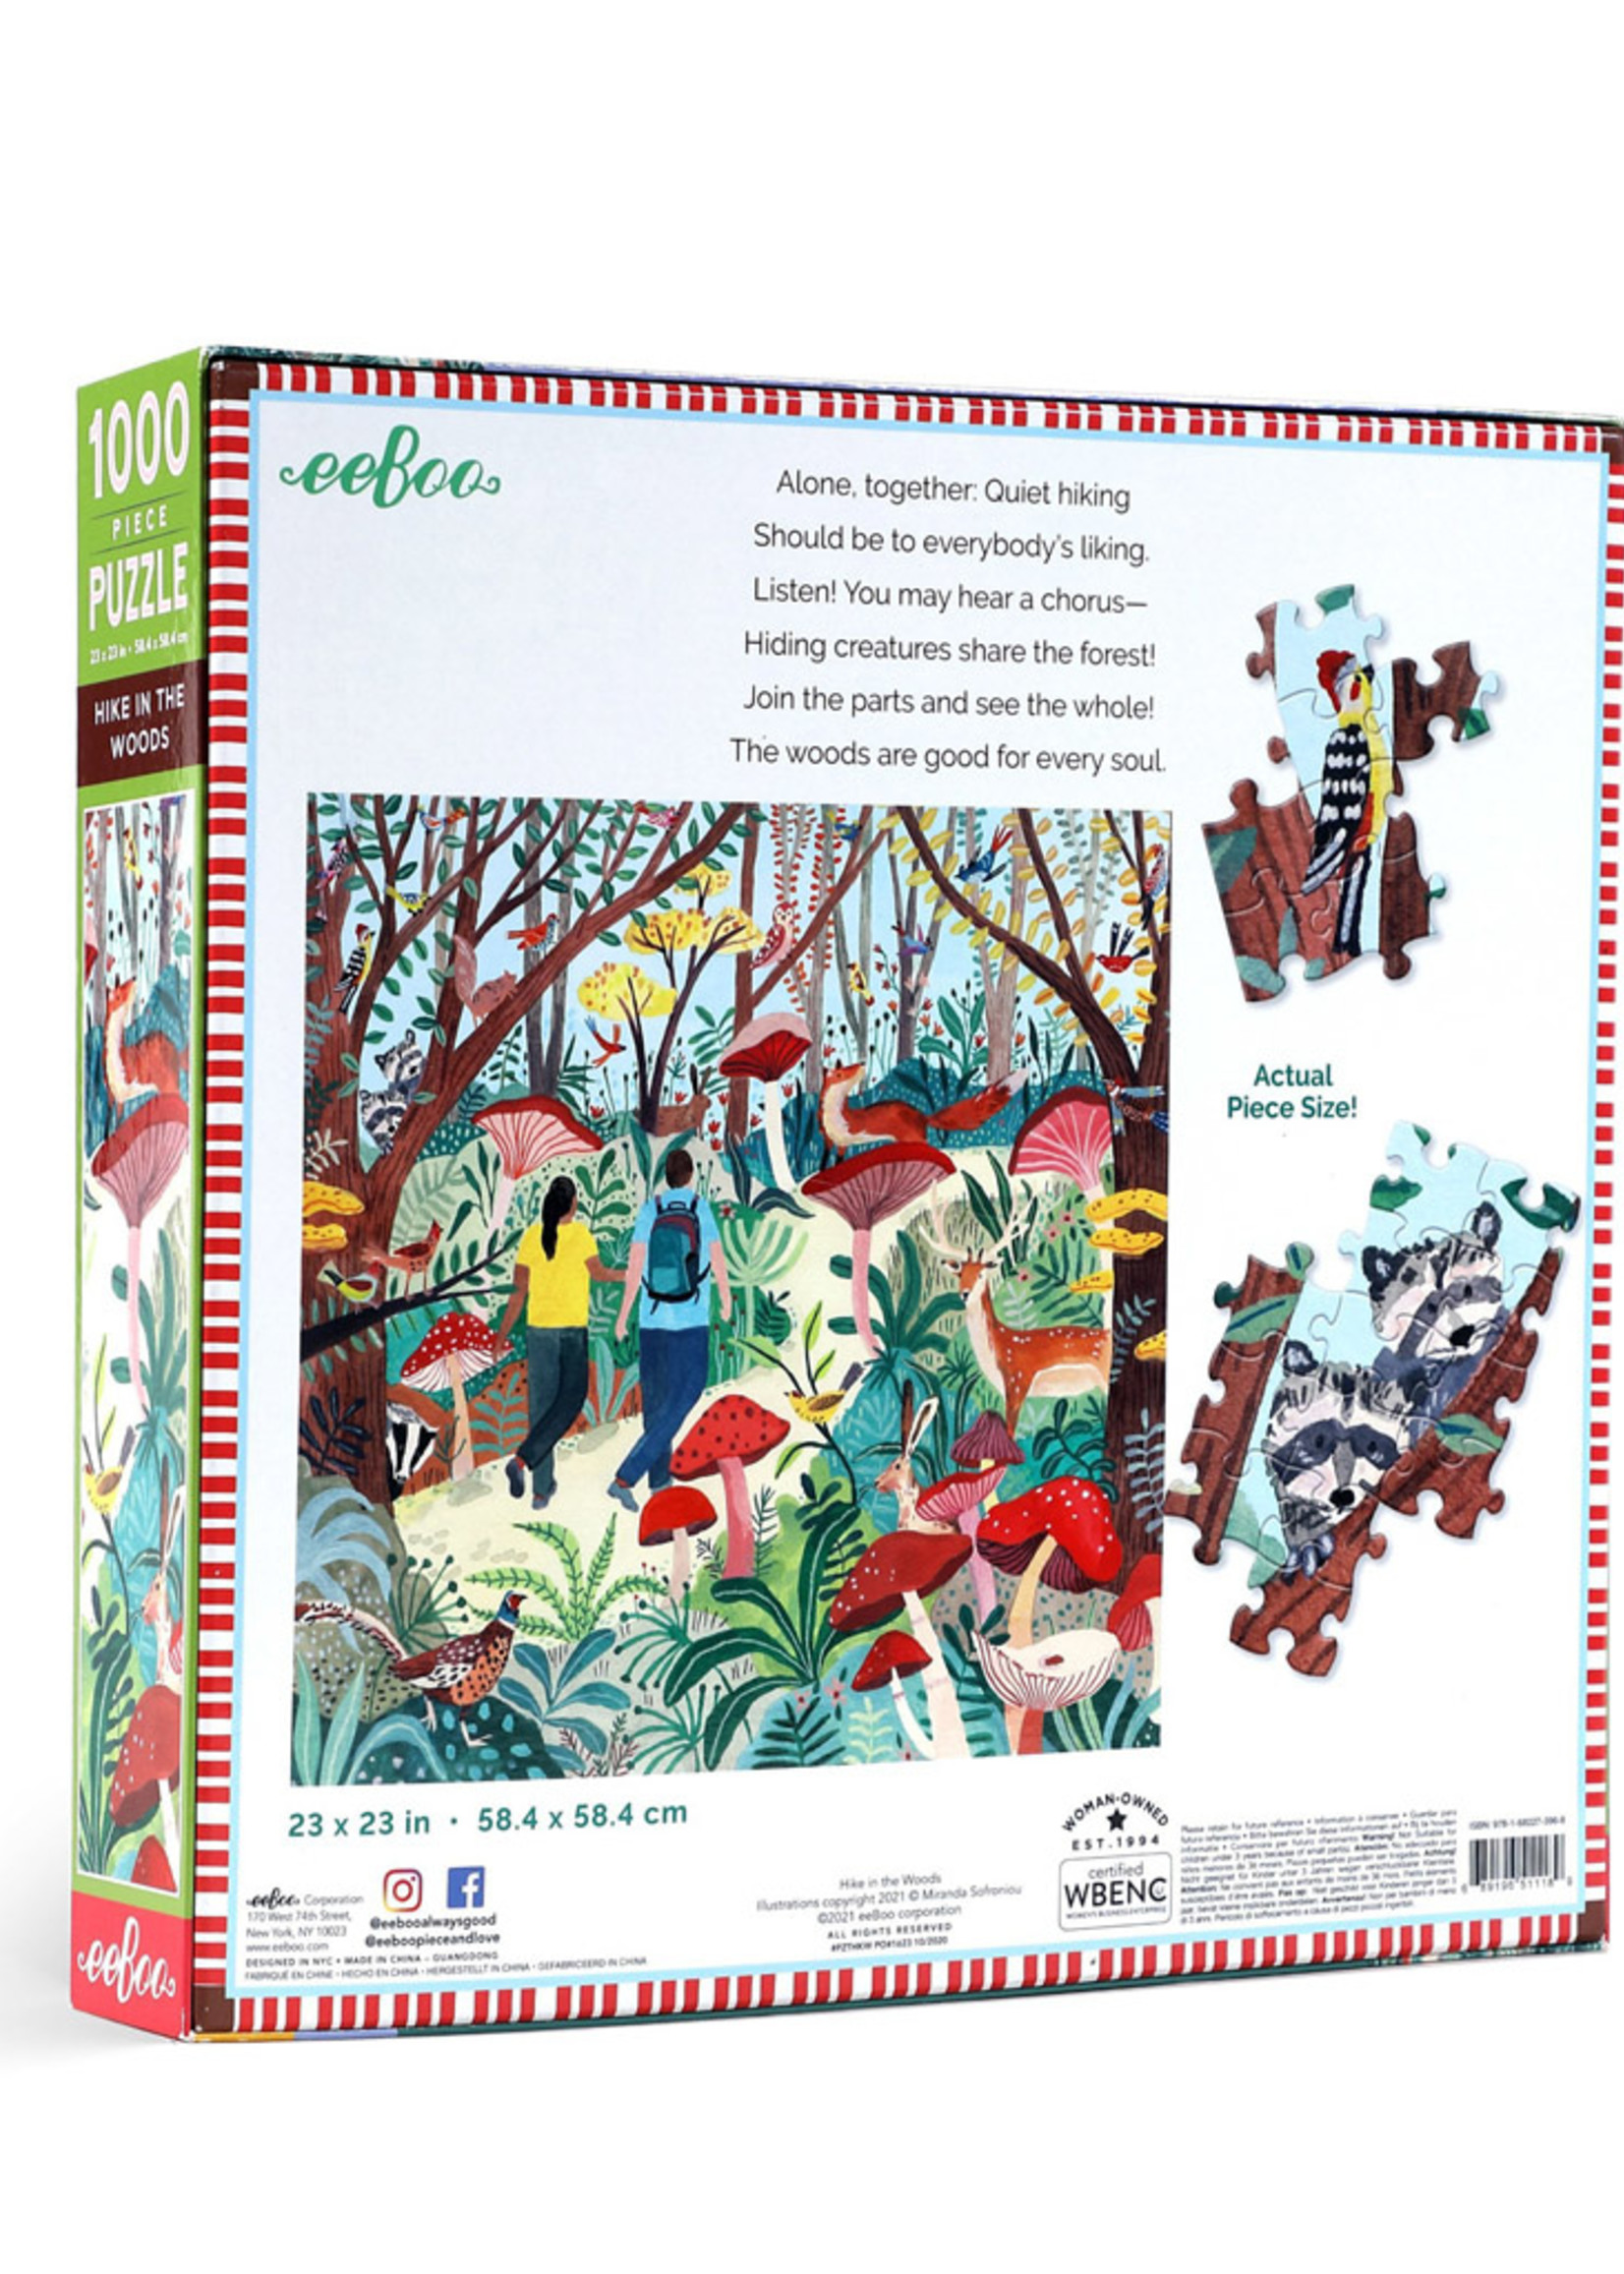 eeBoo Hike in the Woods Puzzle, 1000pc - Box